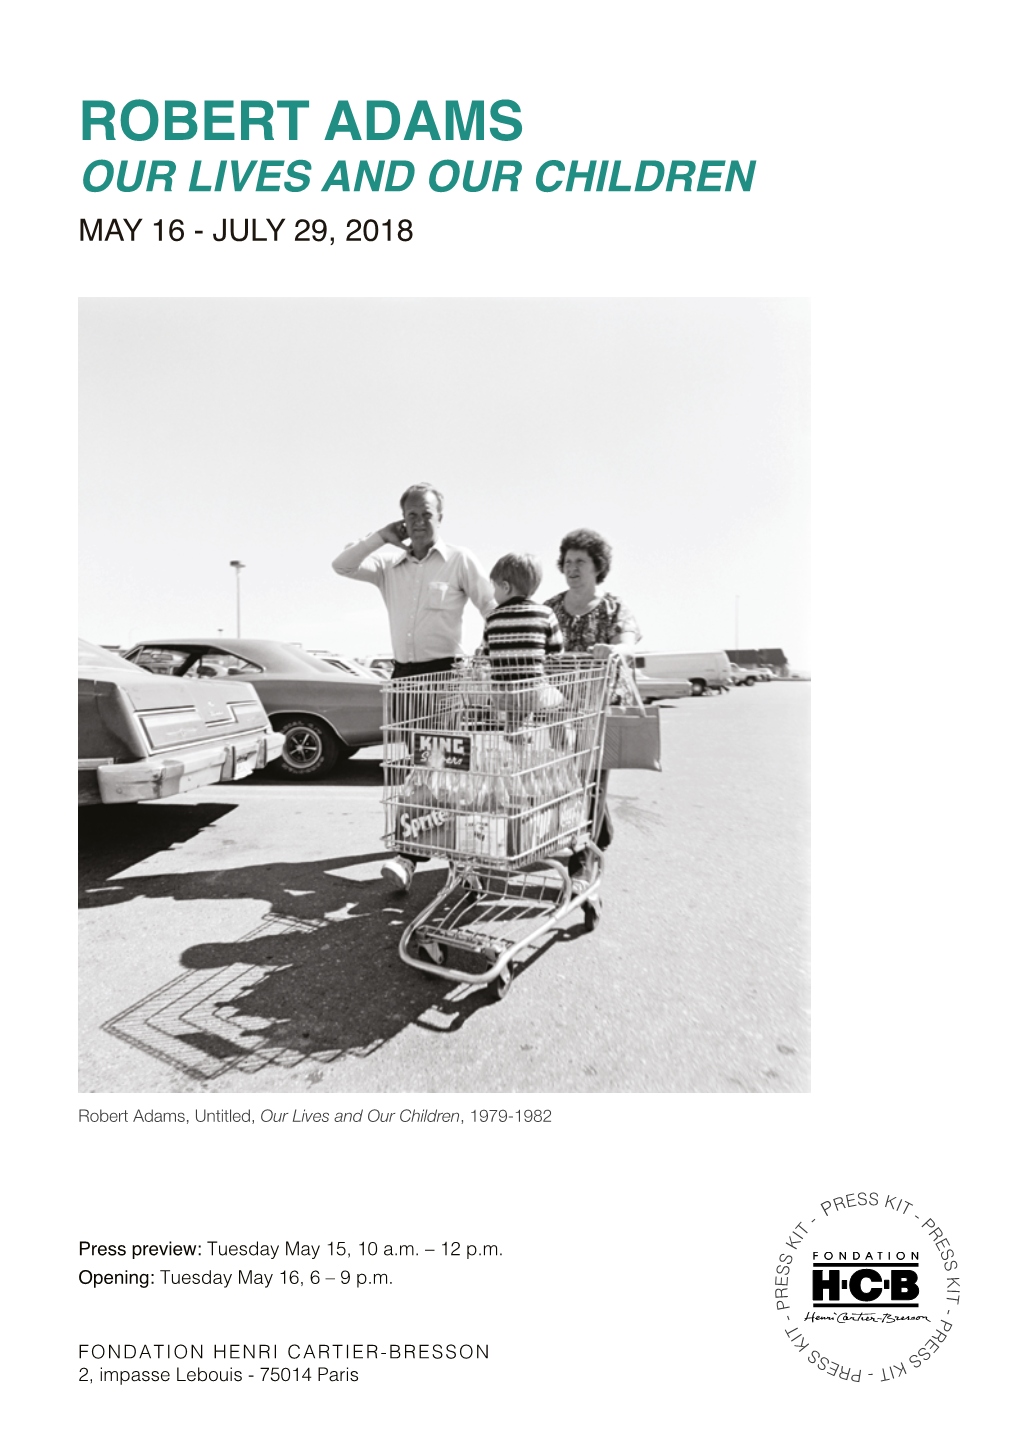 Robert Adams Our Lives and Our Children May 16 - July 29, 2018